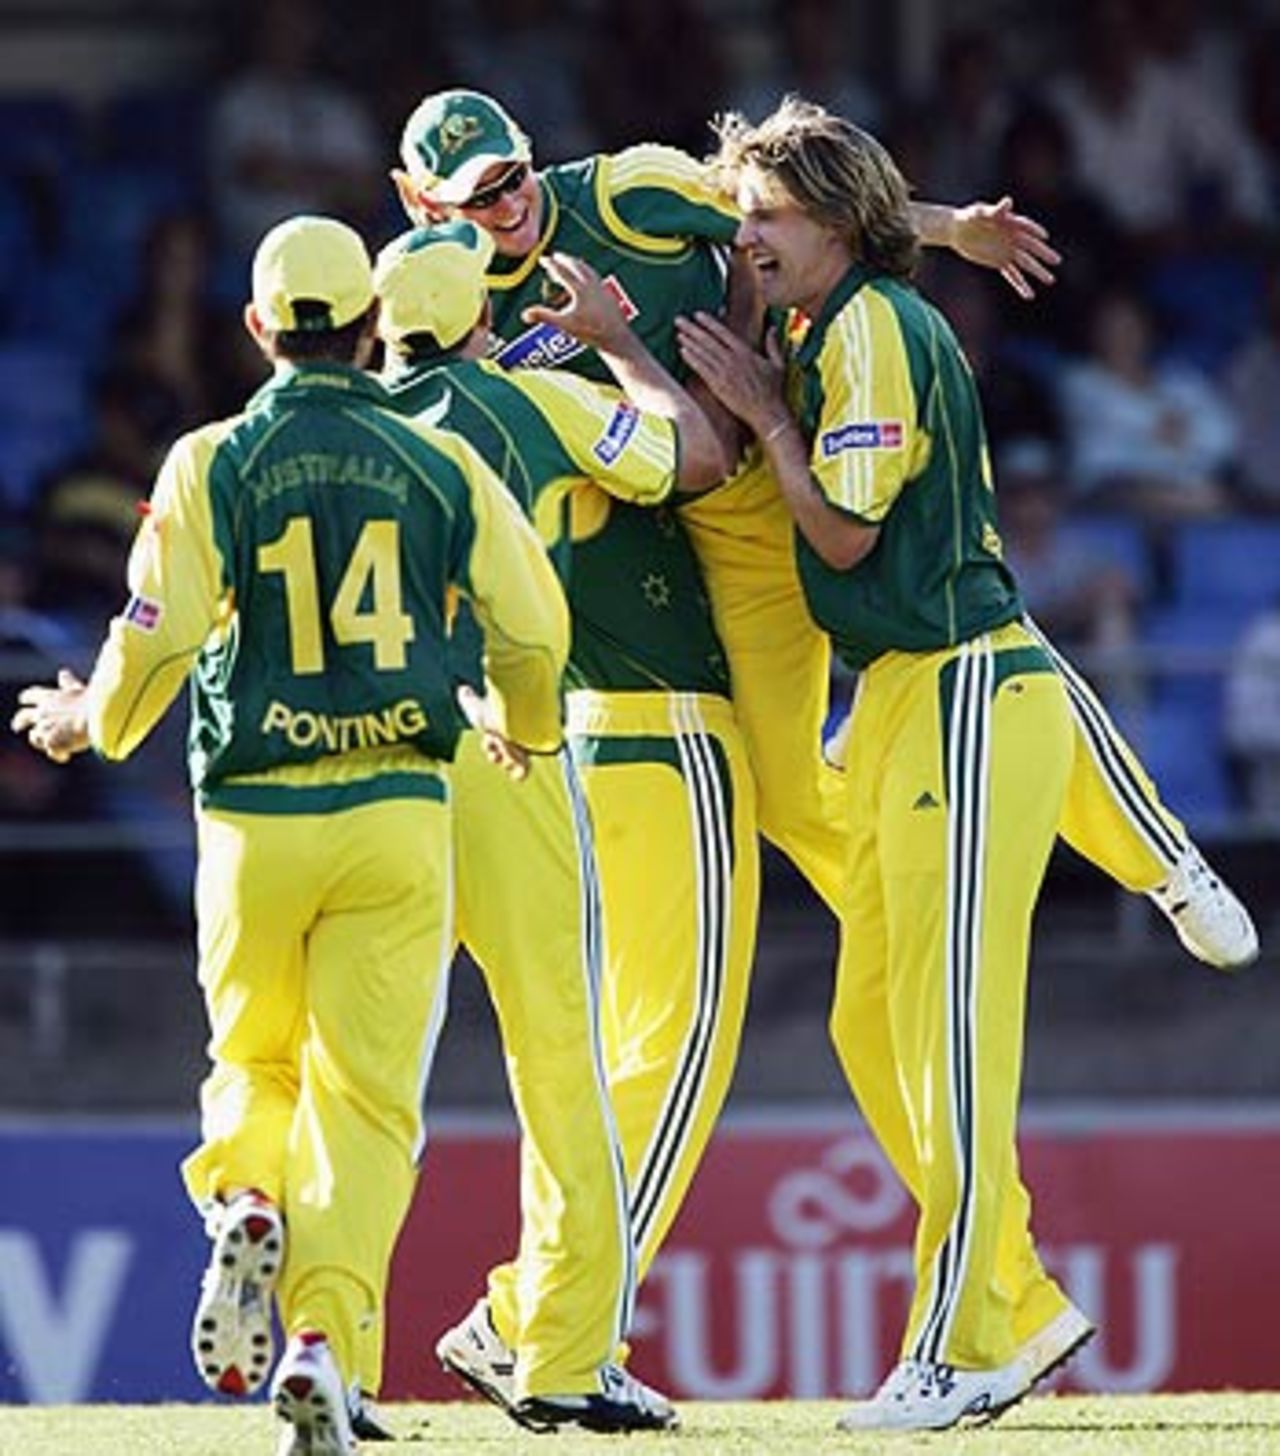 Michael Clarke is mobbed after taking a superb catch, New Zealand v Australia, 1st ODI, Chappell-Hadlee Trophy, Auckland, December 3, 2005